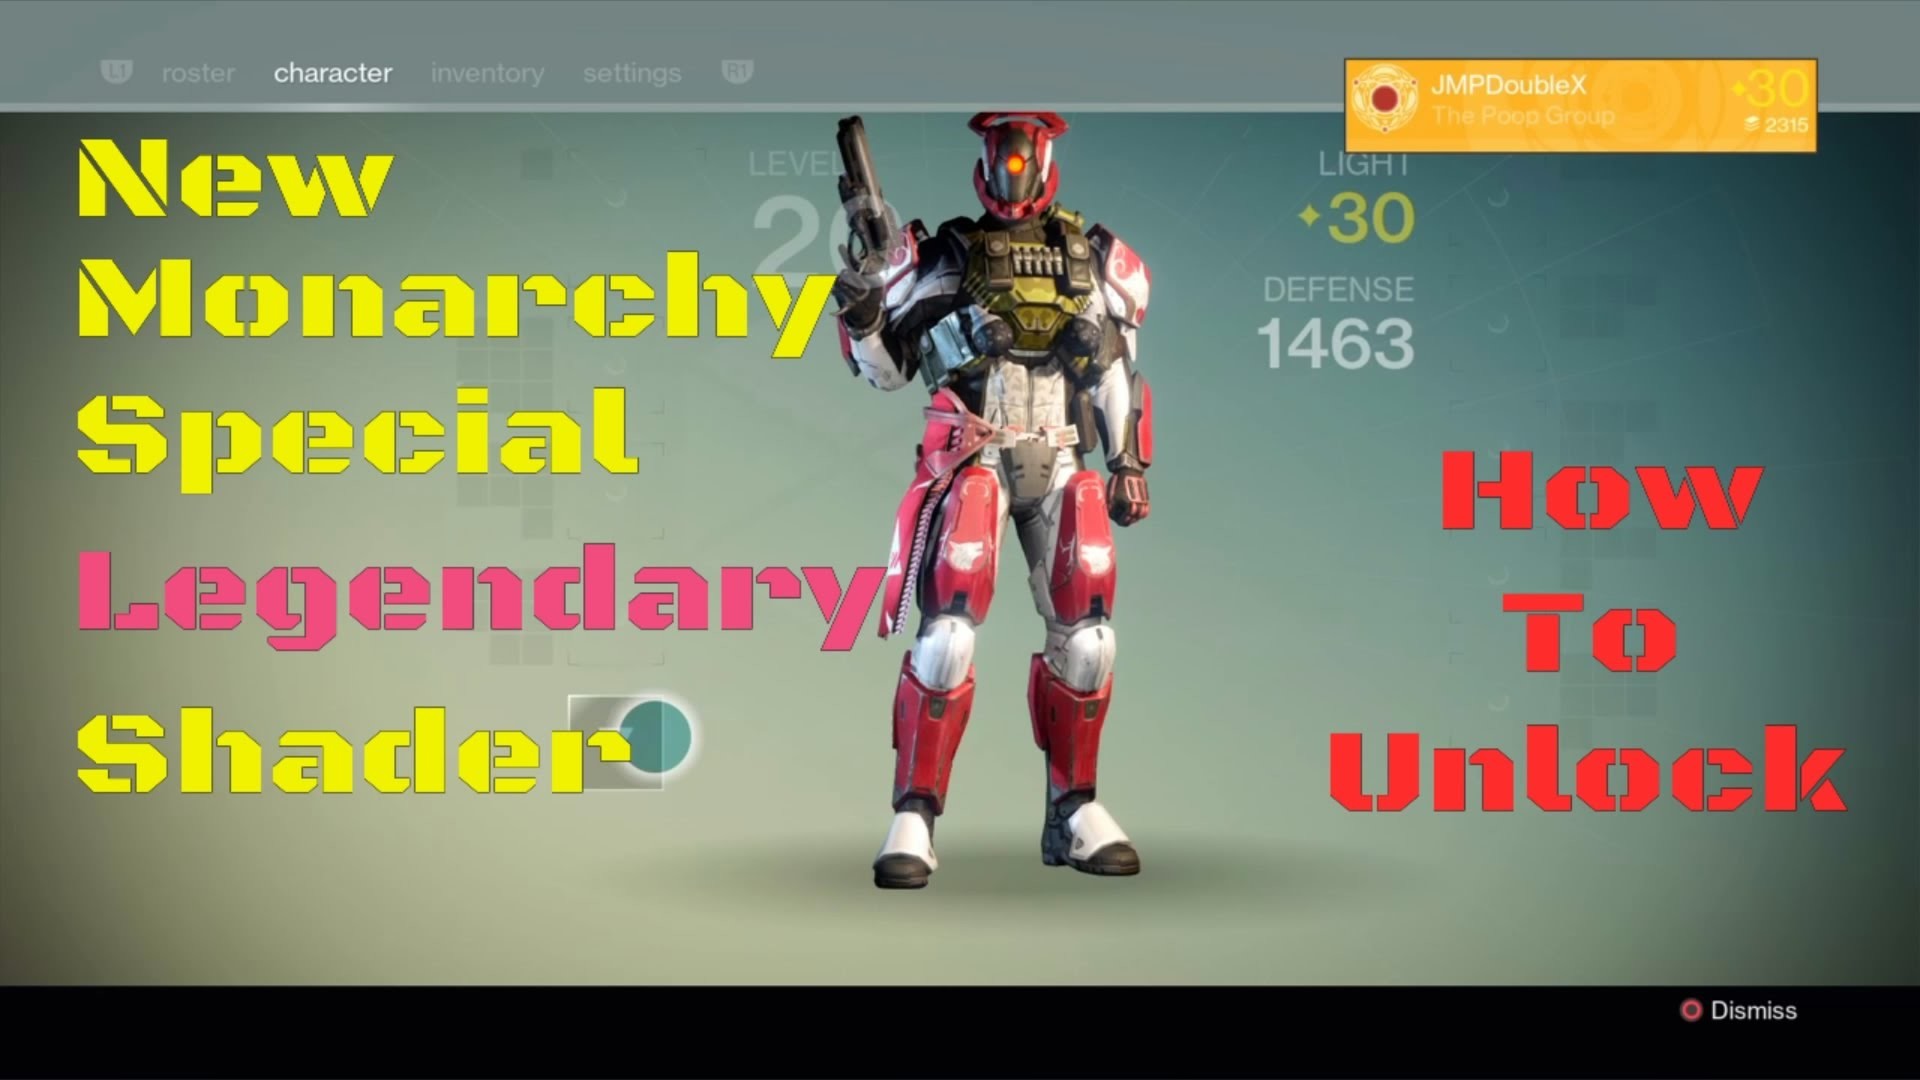 1920x1080 Destiny - Special New Monarchy Shader - Amalthea Legendary Shader - How To  Get - YouTube